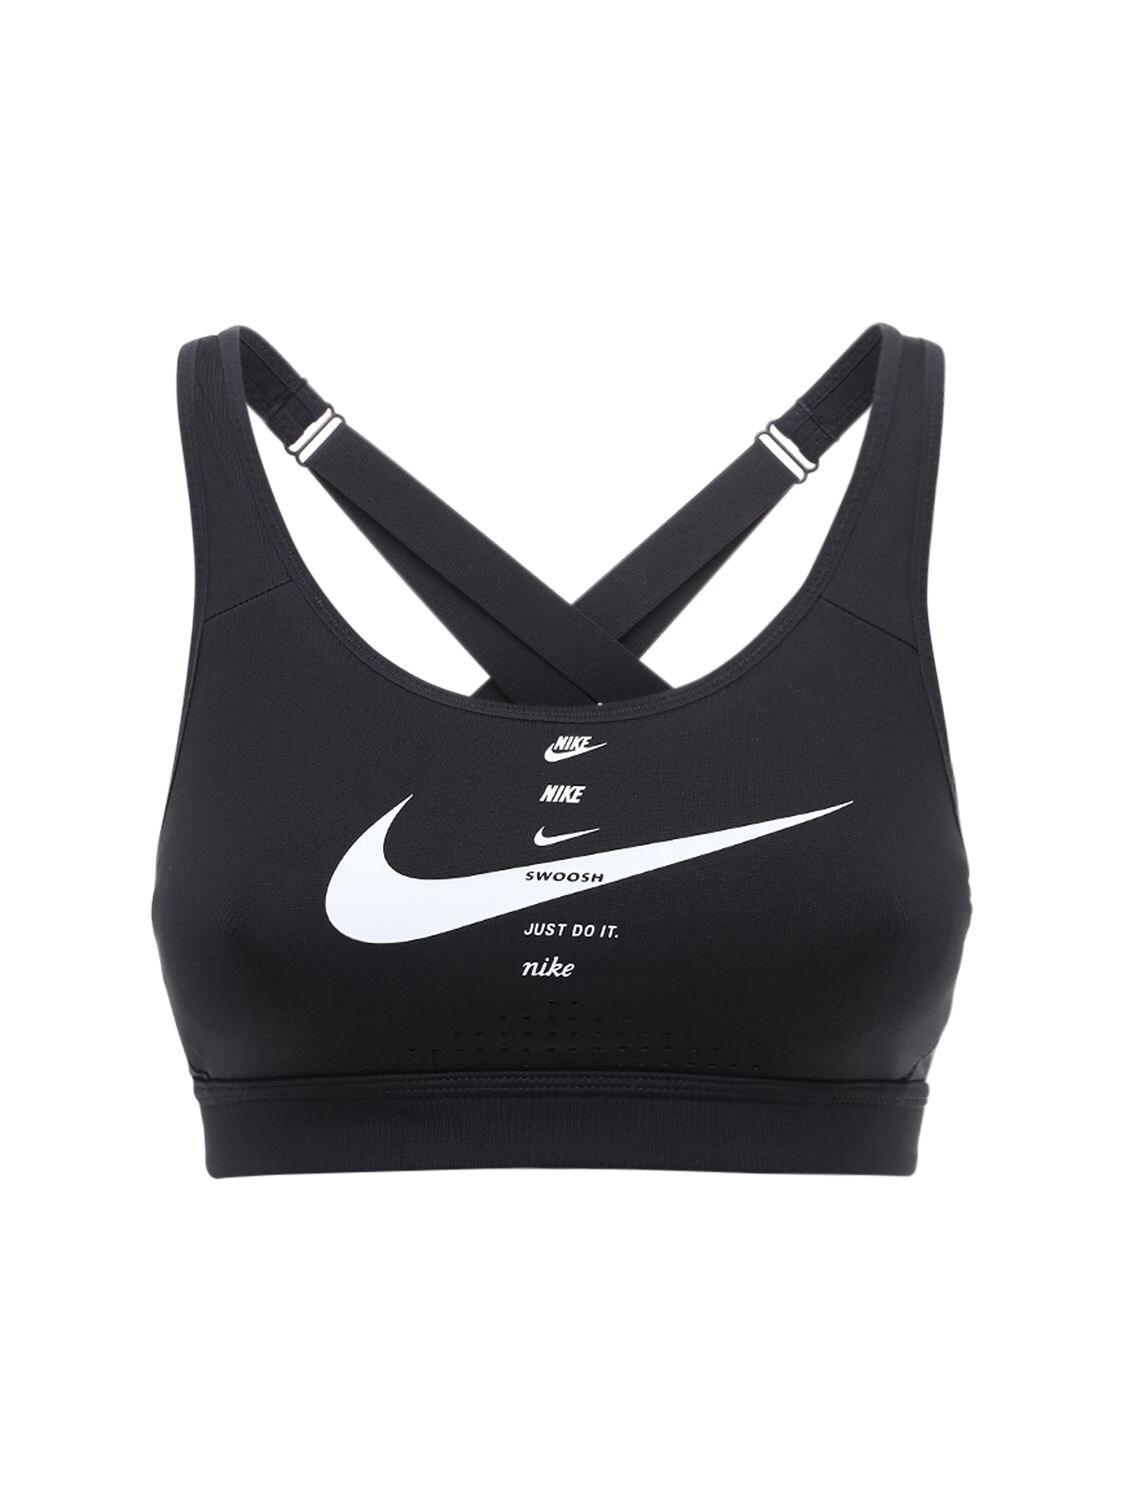 Nike Impact Strappy High Support Sports Bra in Black | Lyst